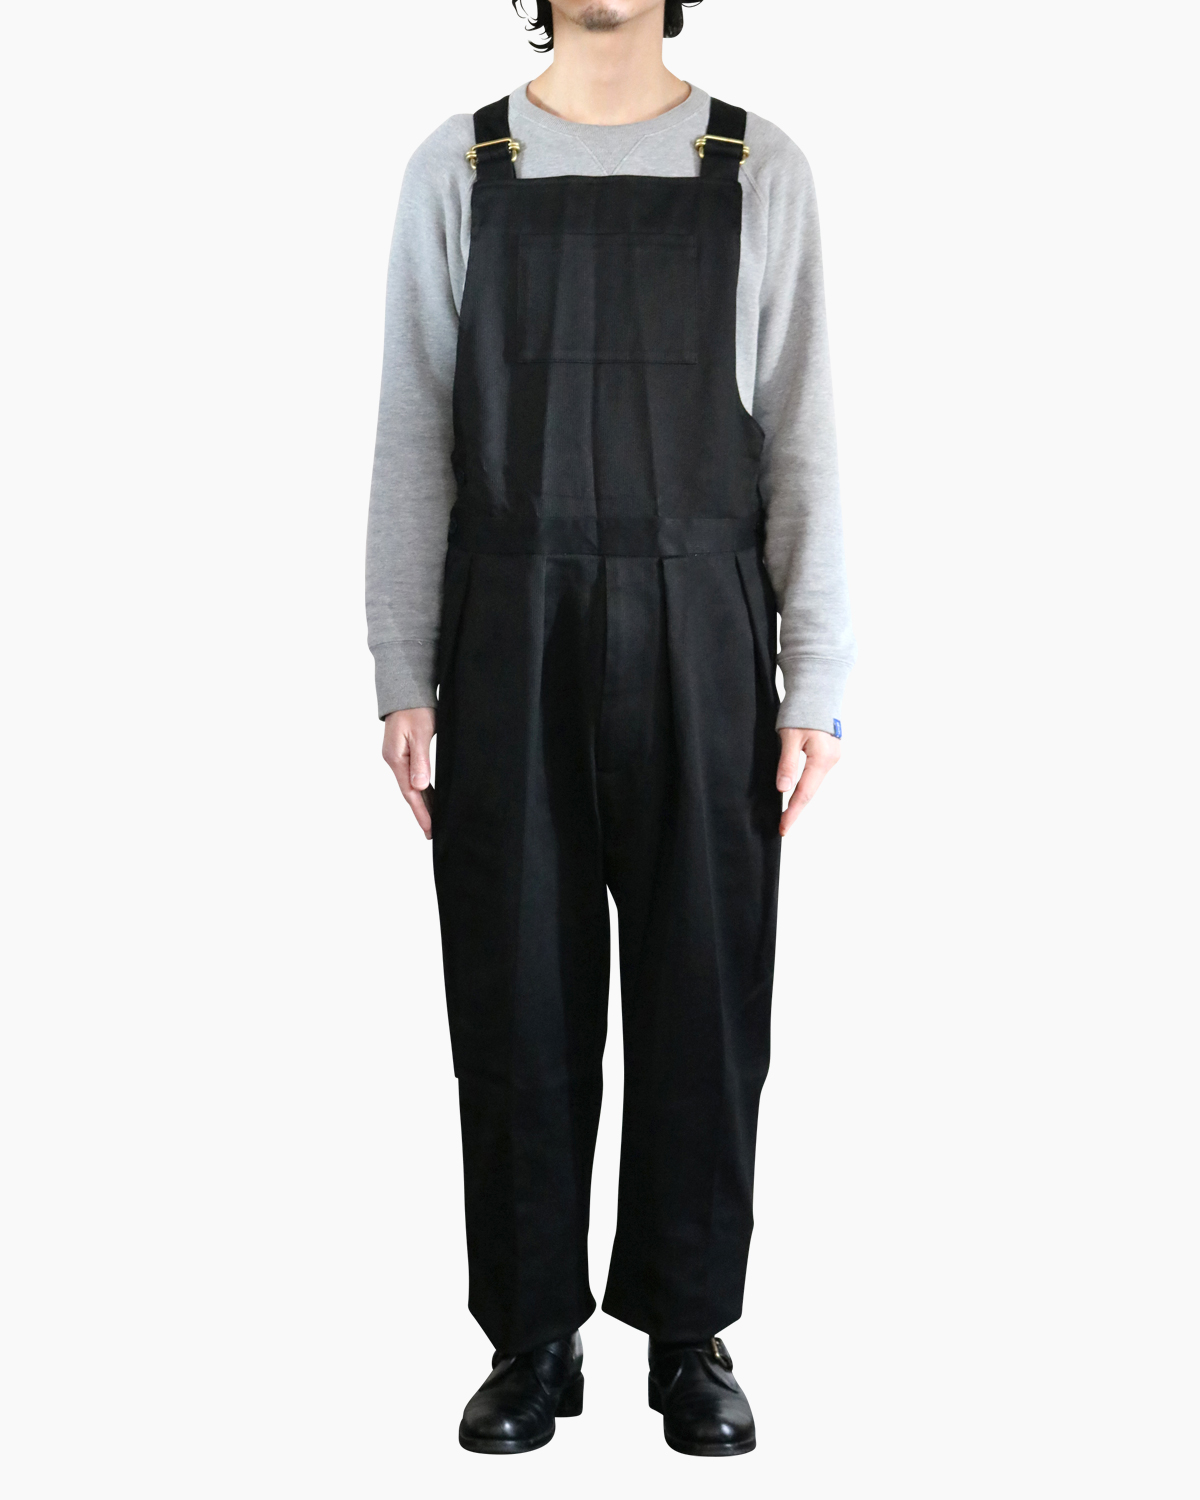 NEAT｜COTTON PIQUE｜OVERALL - Black｜PRODUCT｜Continuer Inc 